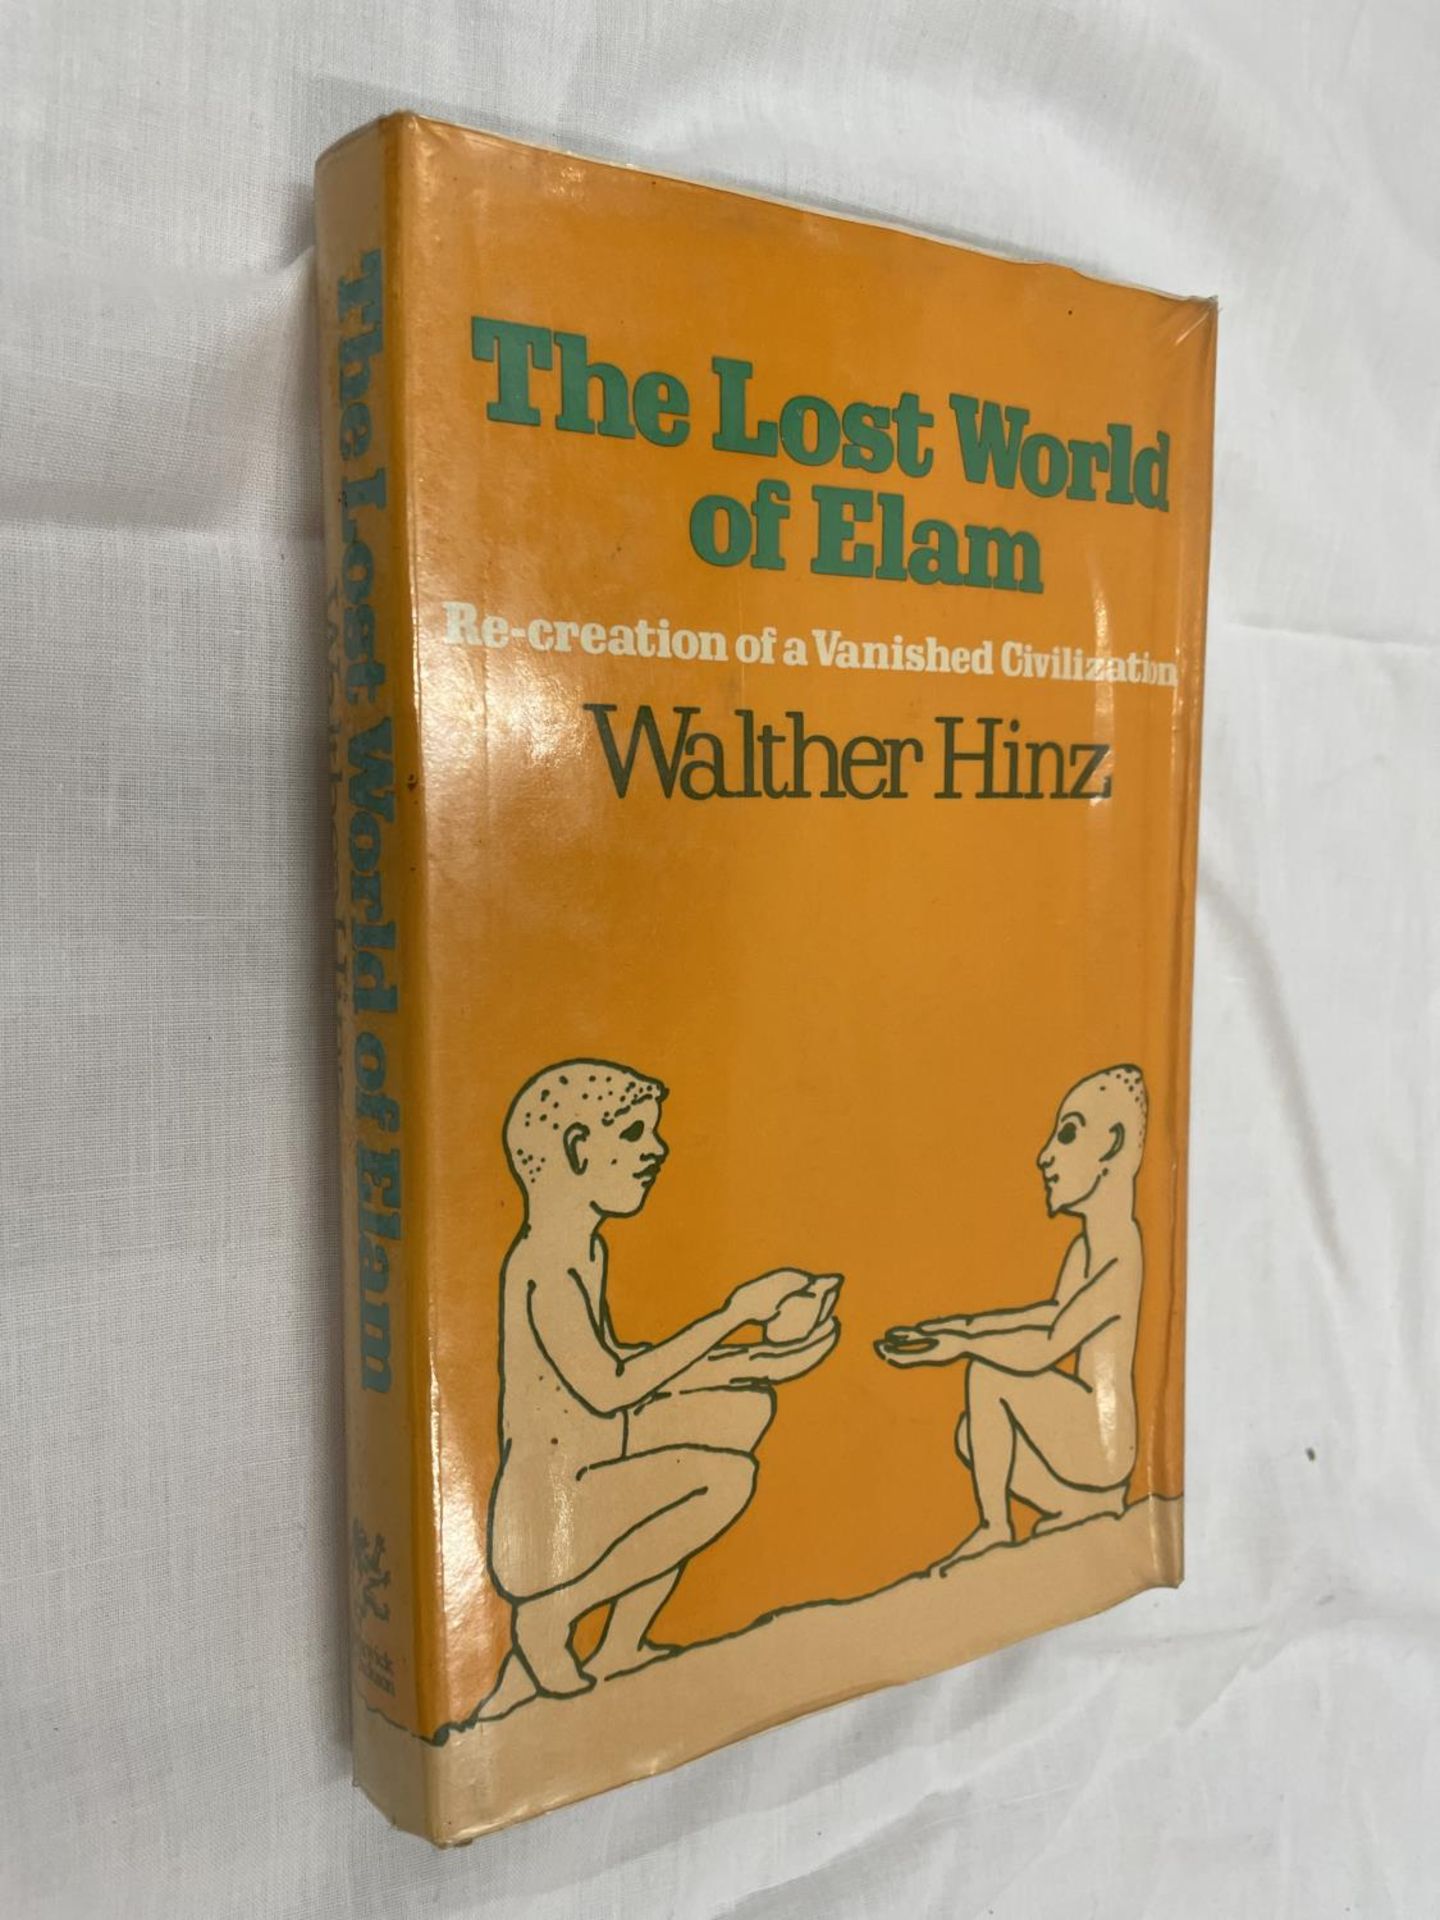 A FIRST EDITION LOST WORLD OF ELAM BY WALTER HINZ - Image 2 of 4